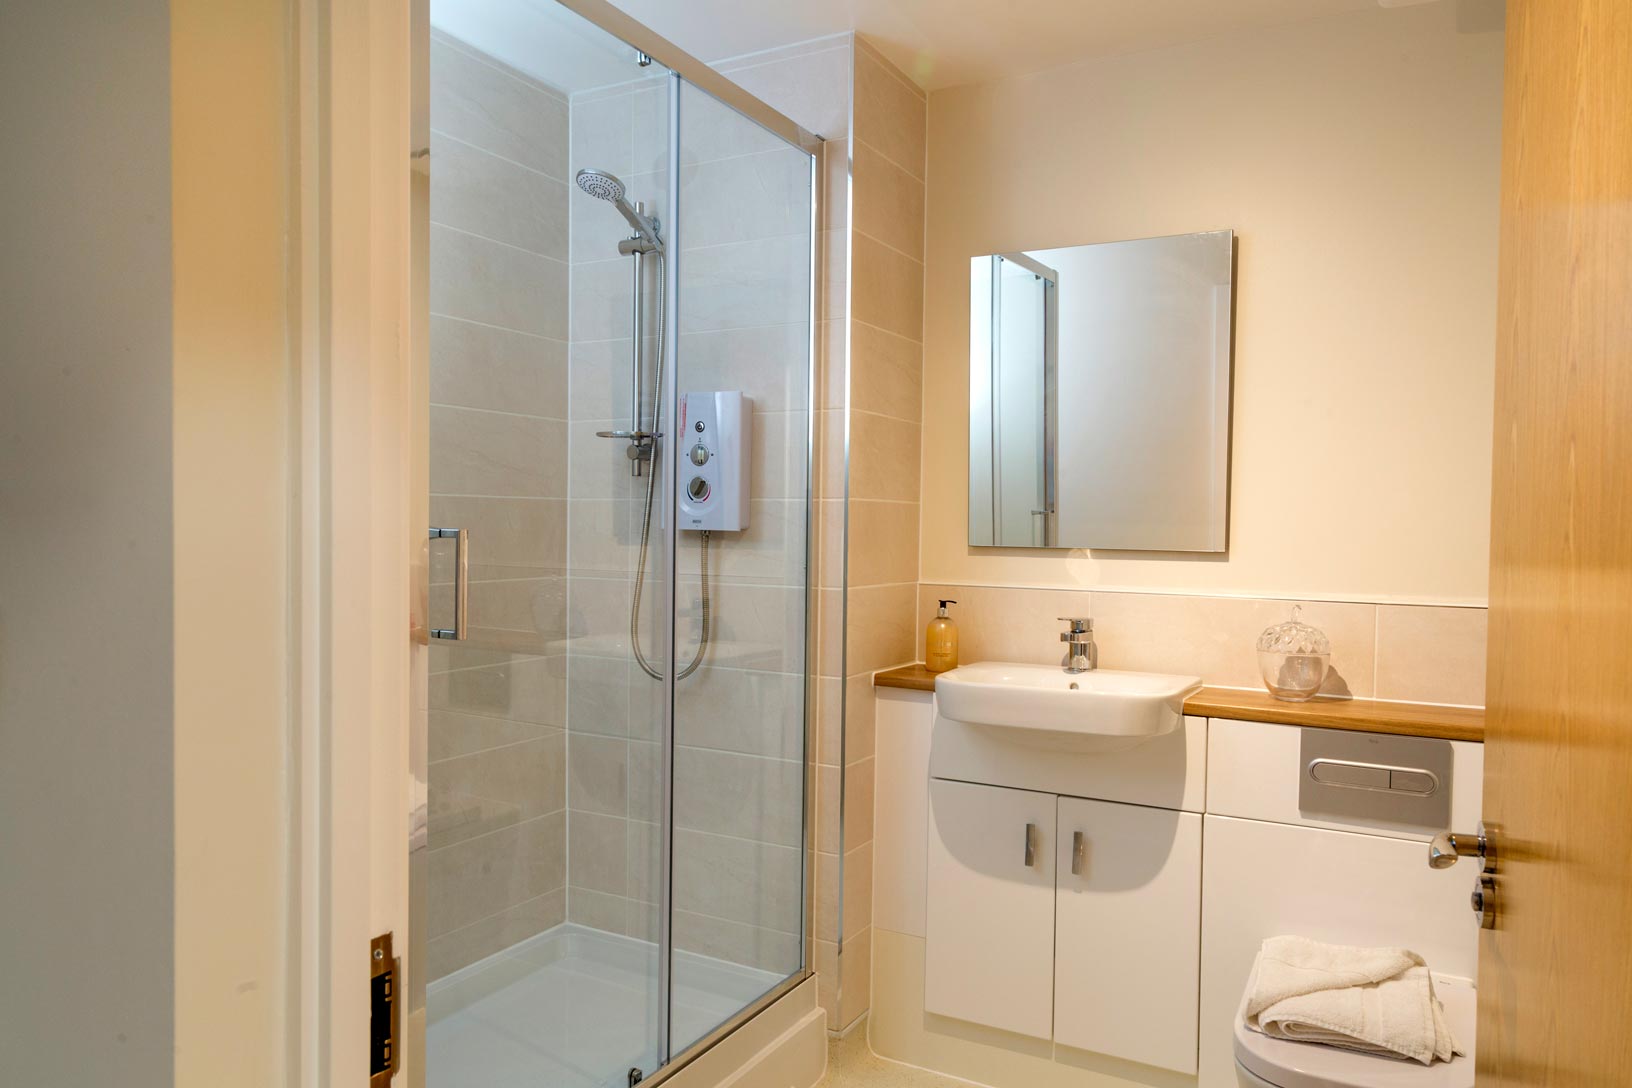 A shower room facilitated with modern mirror, shower head and basin with storage accessibility.